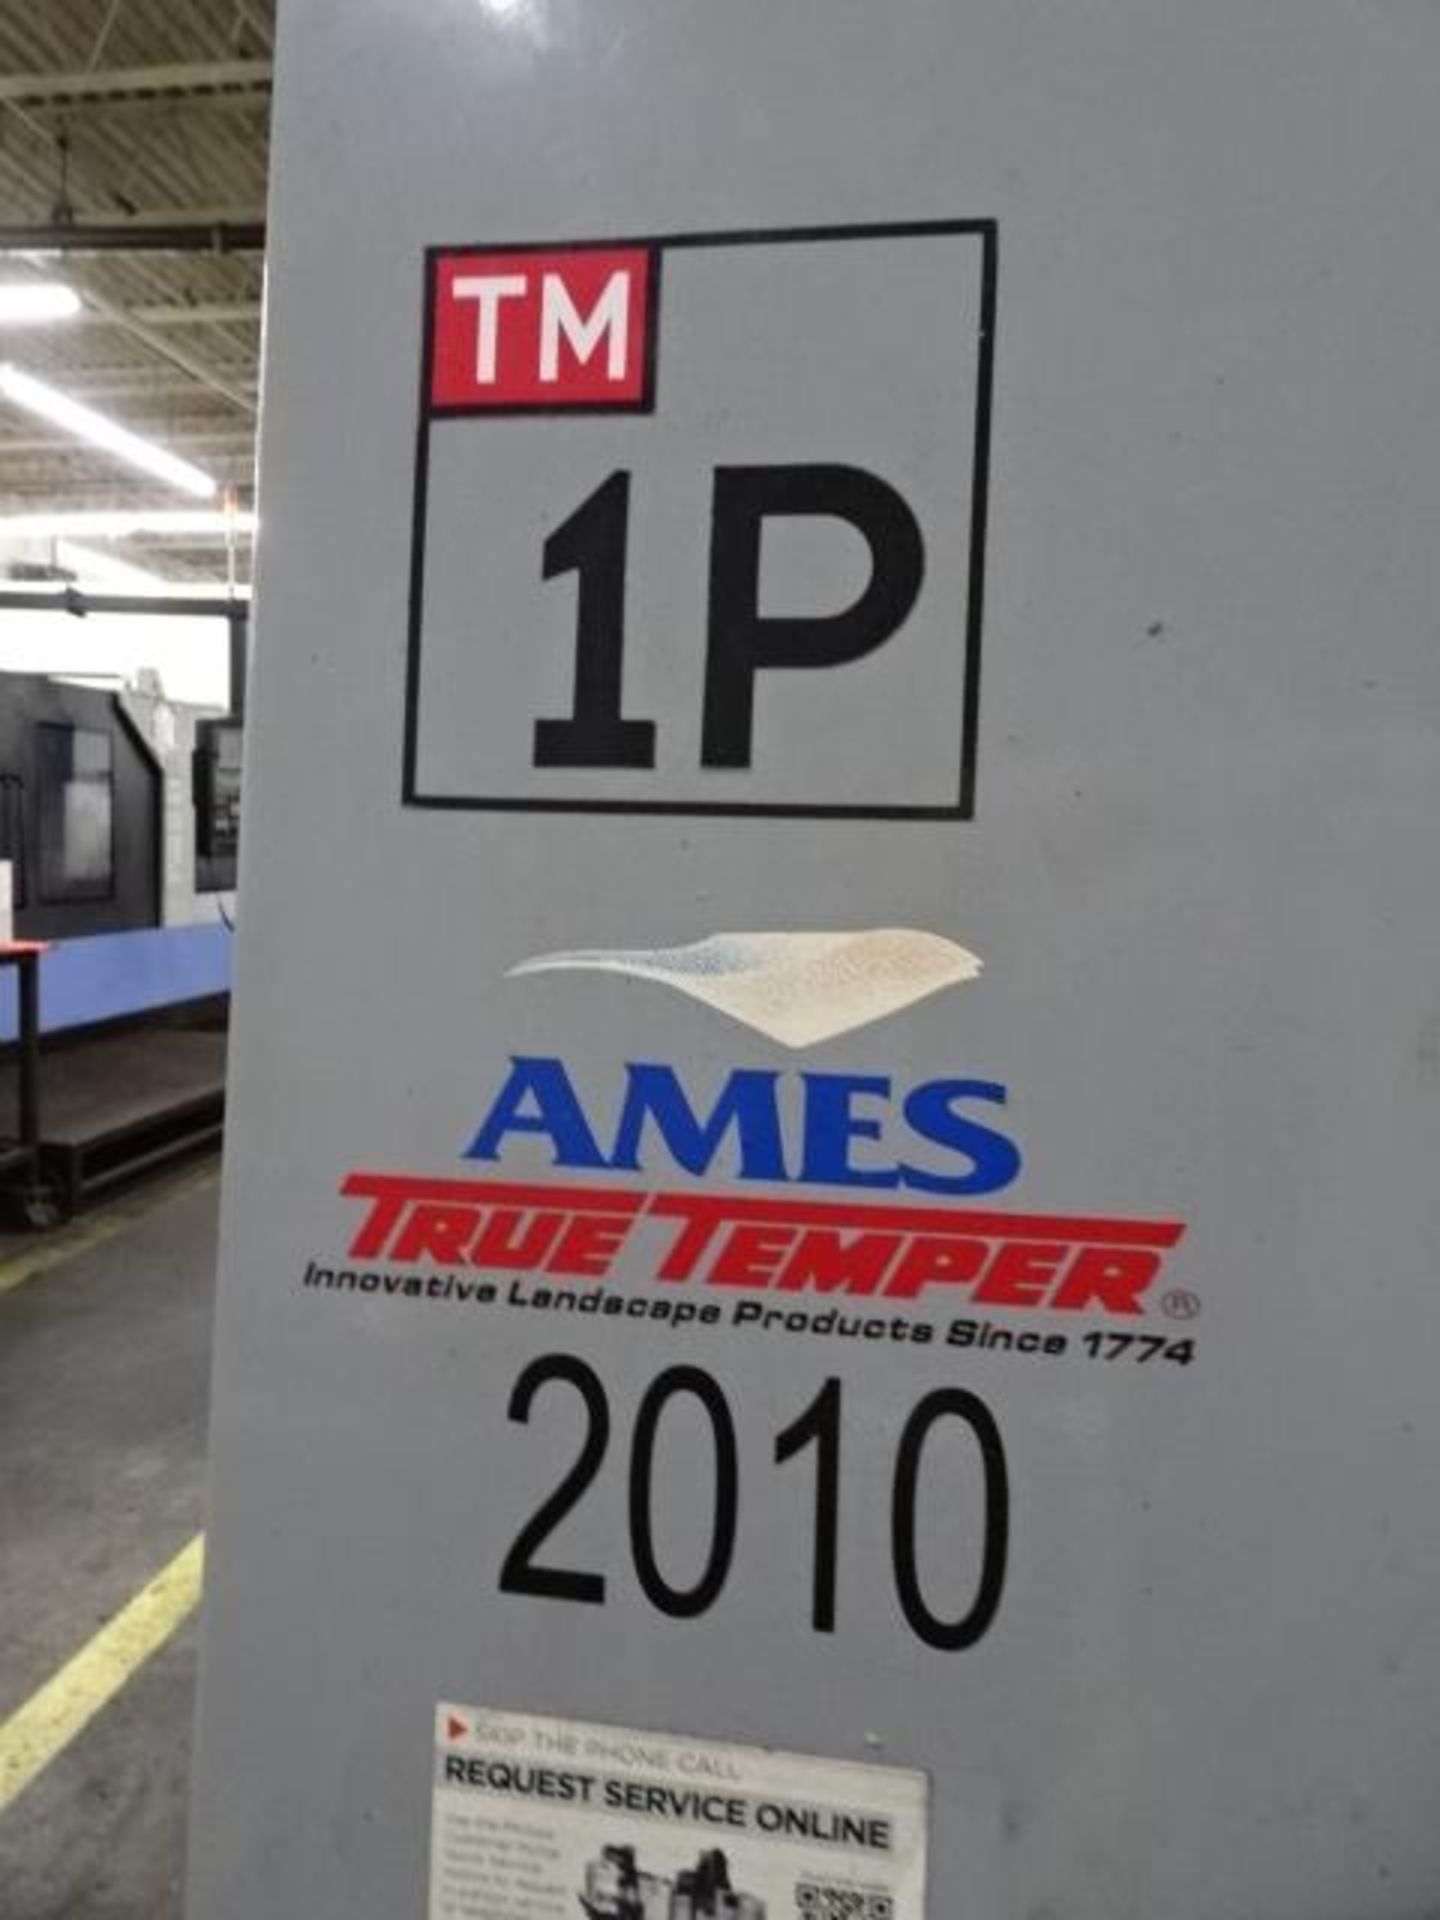 Haas CNC Toolroom Mill - Image 4 of 7